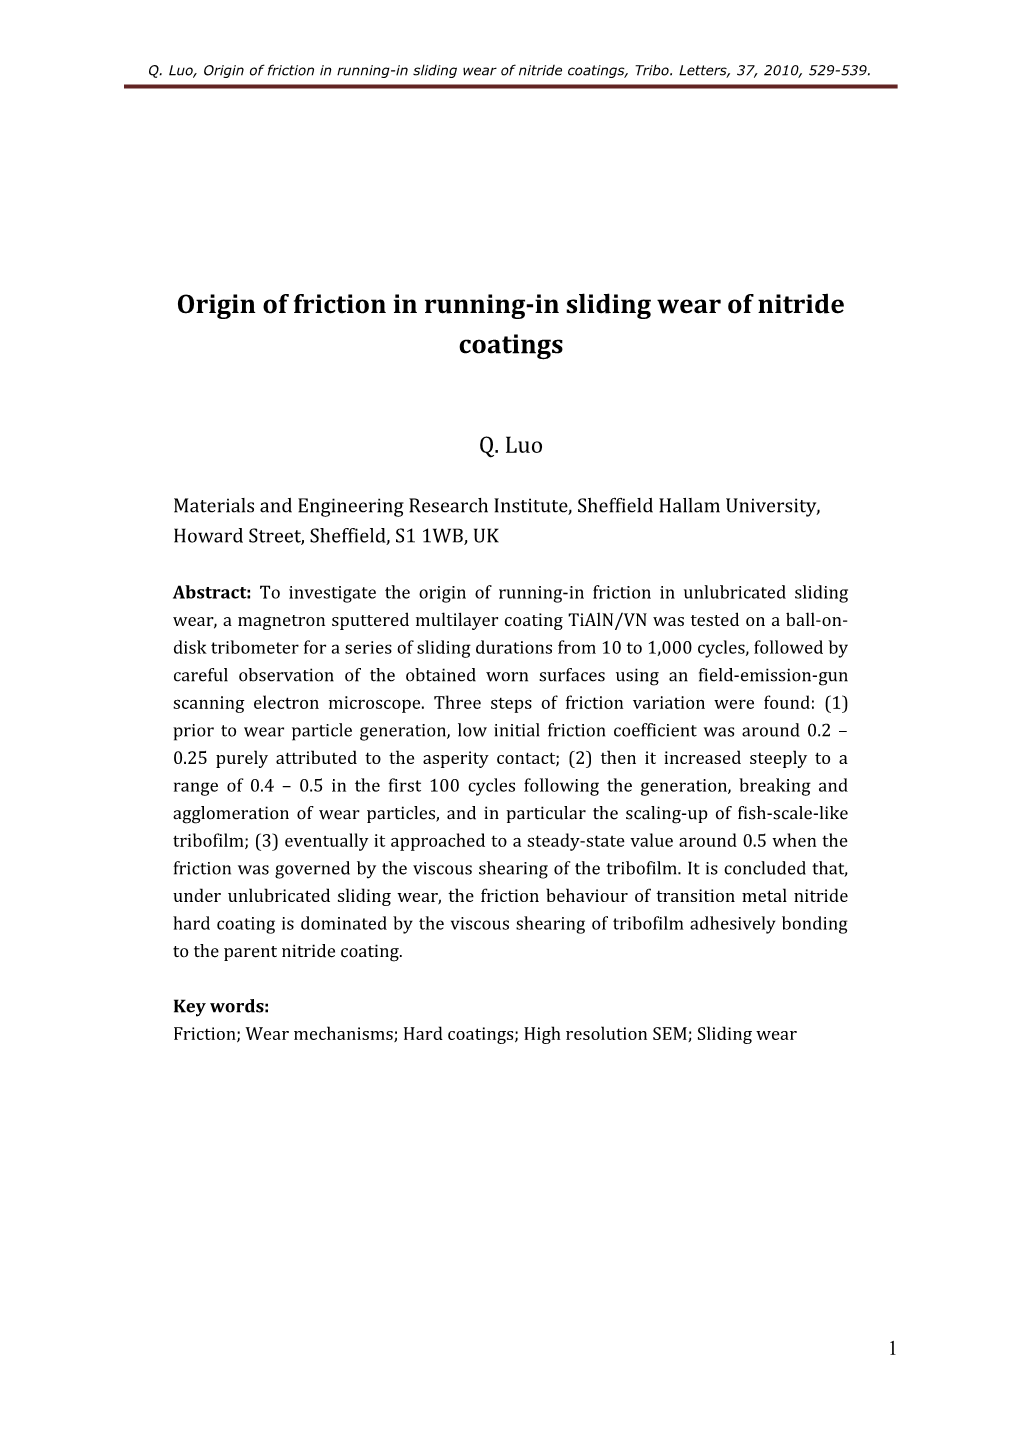 Q. Luo, Origin of Friction in Running-In Sliding Wear of Nitride Coatings, Tribo. Letters